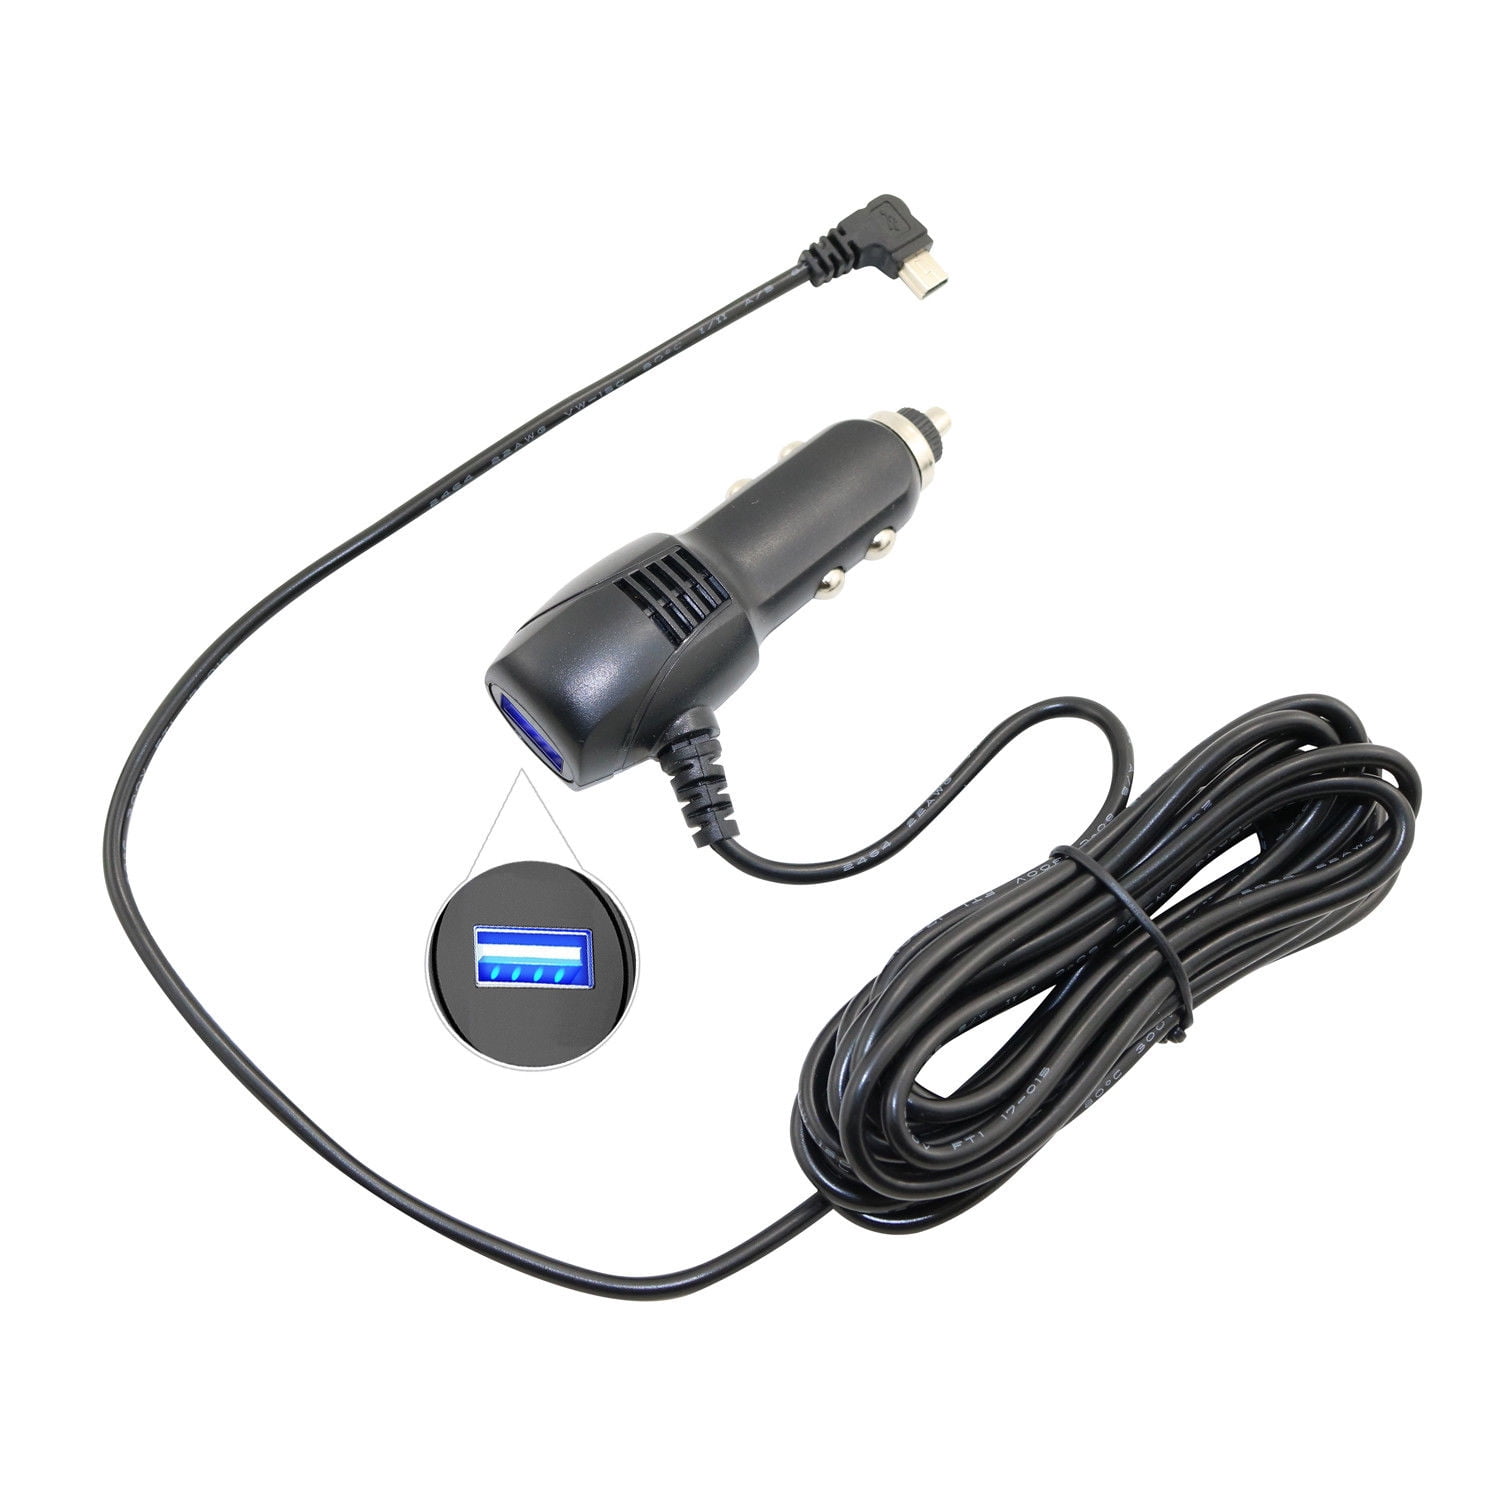 AC Adapter Power Cord for Garmin GPS nuvi 2495/T/M 2495/L/M/T Car Auto Charger 